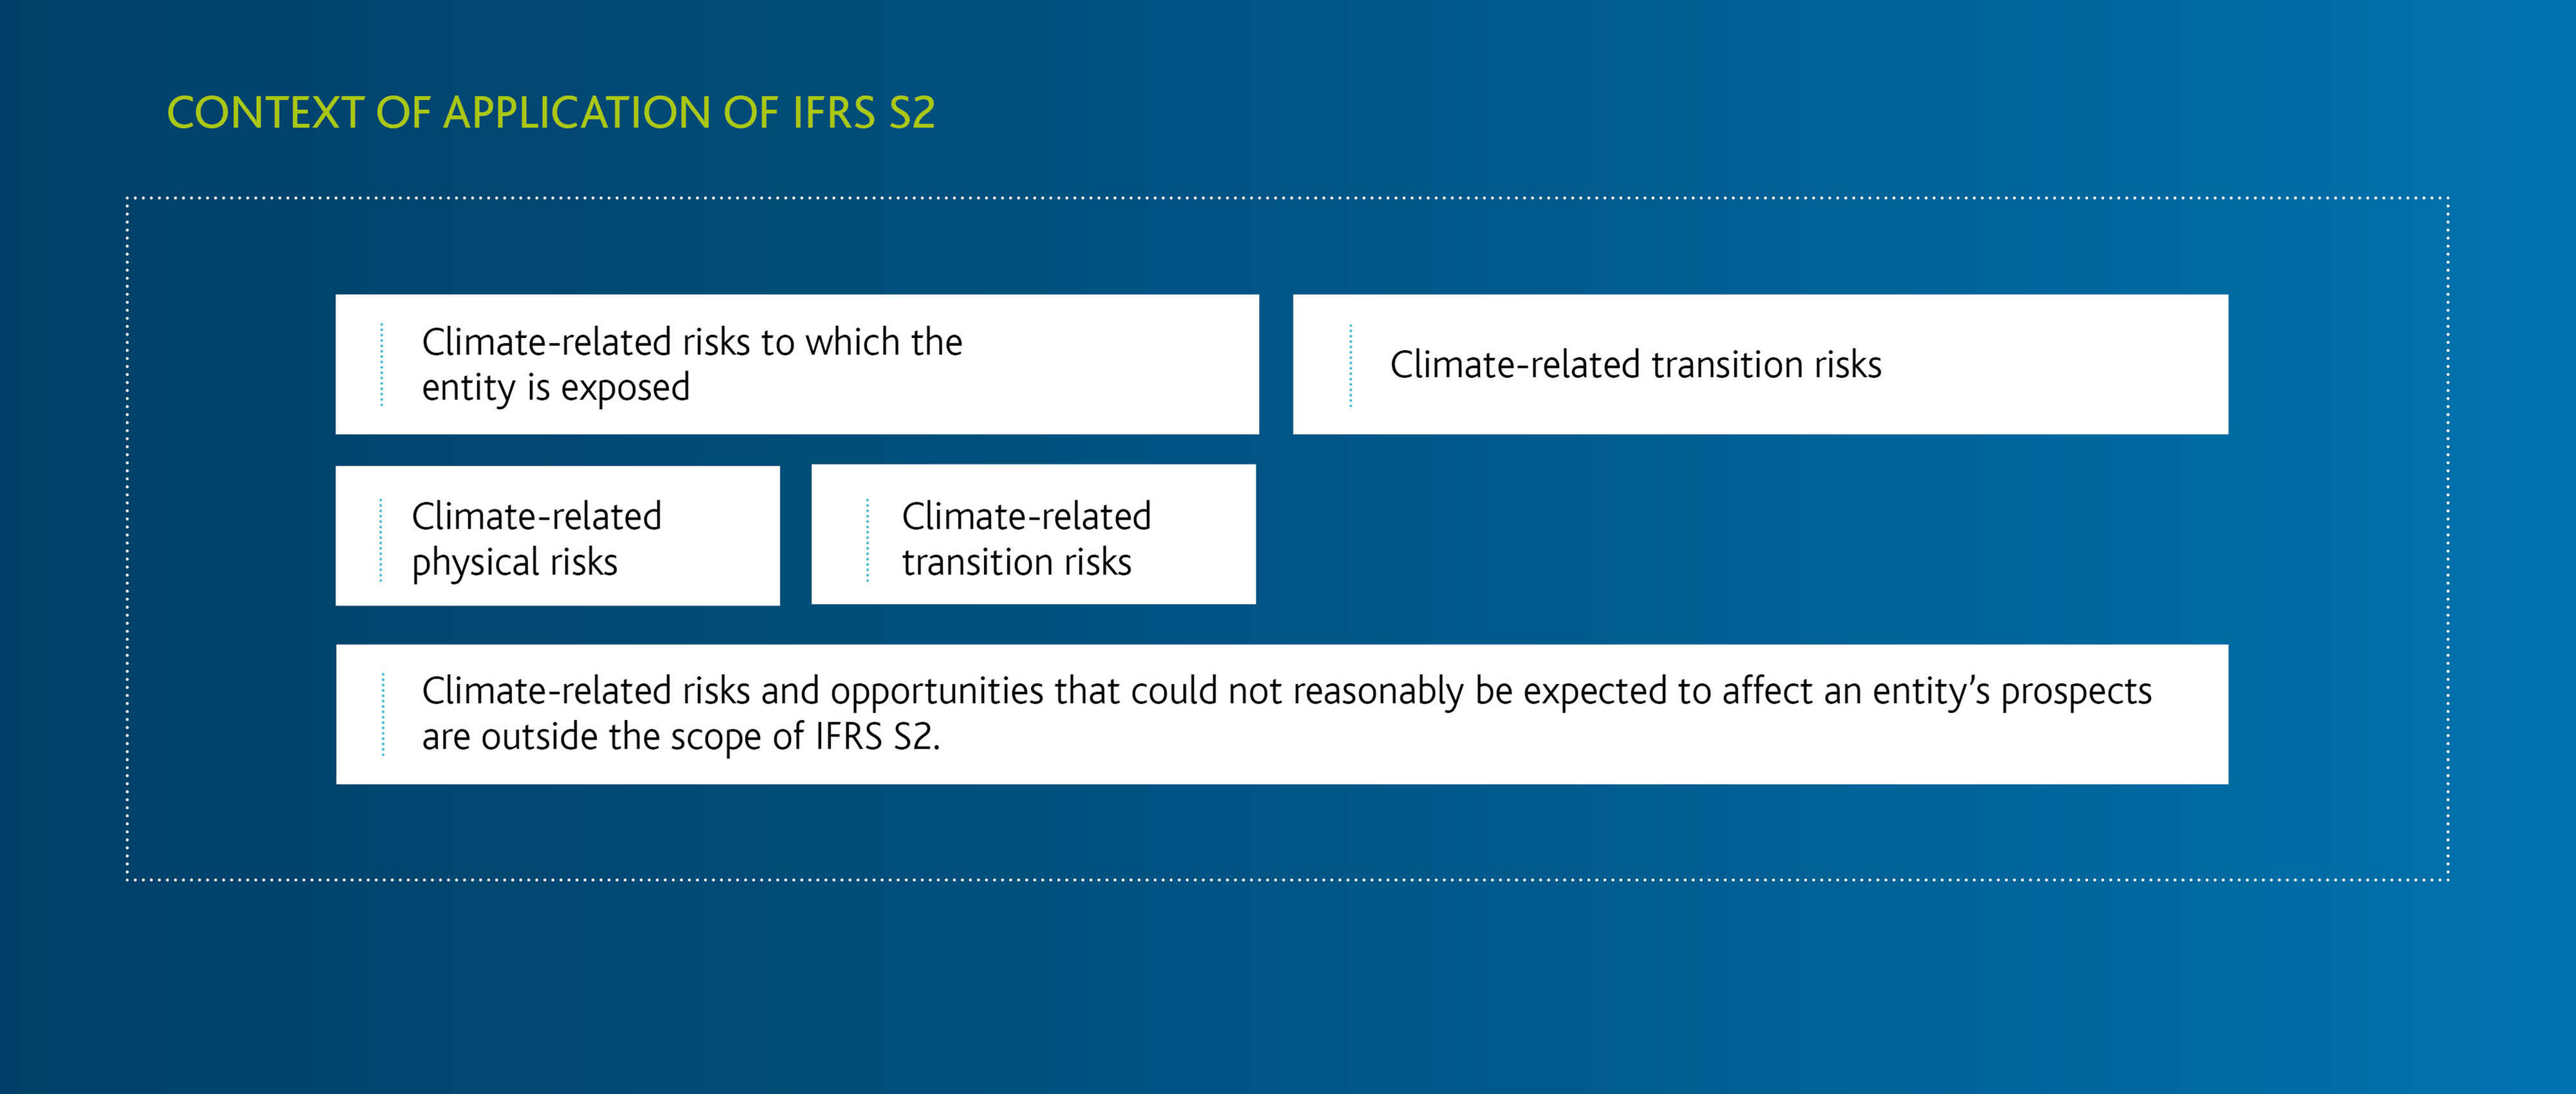 Figure 2 - Context of application of IFRS S2